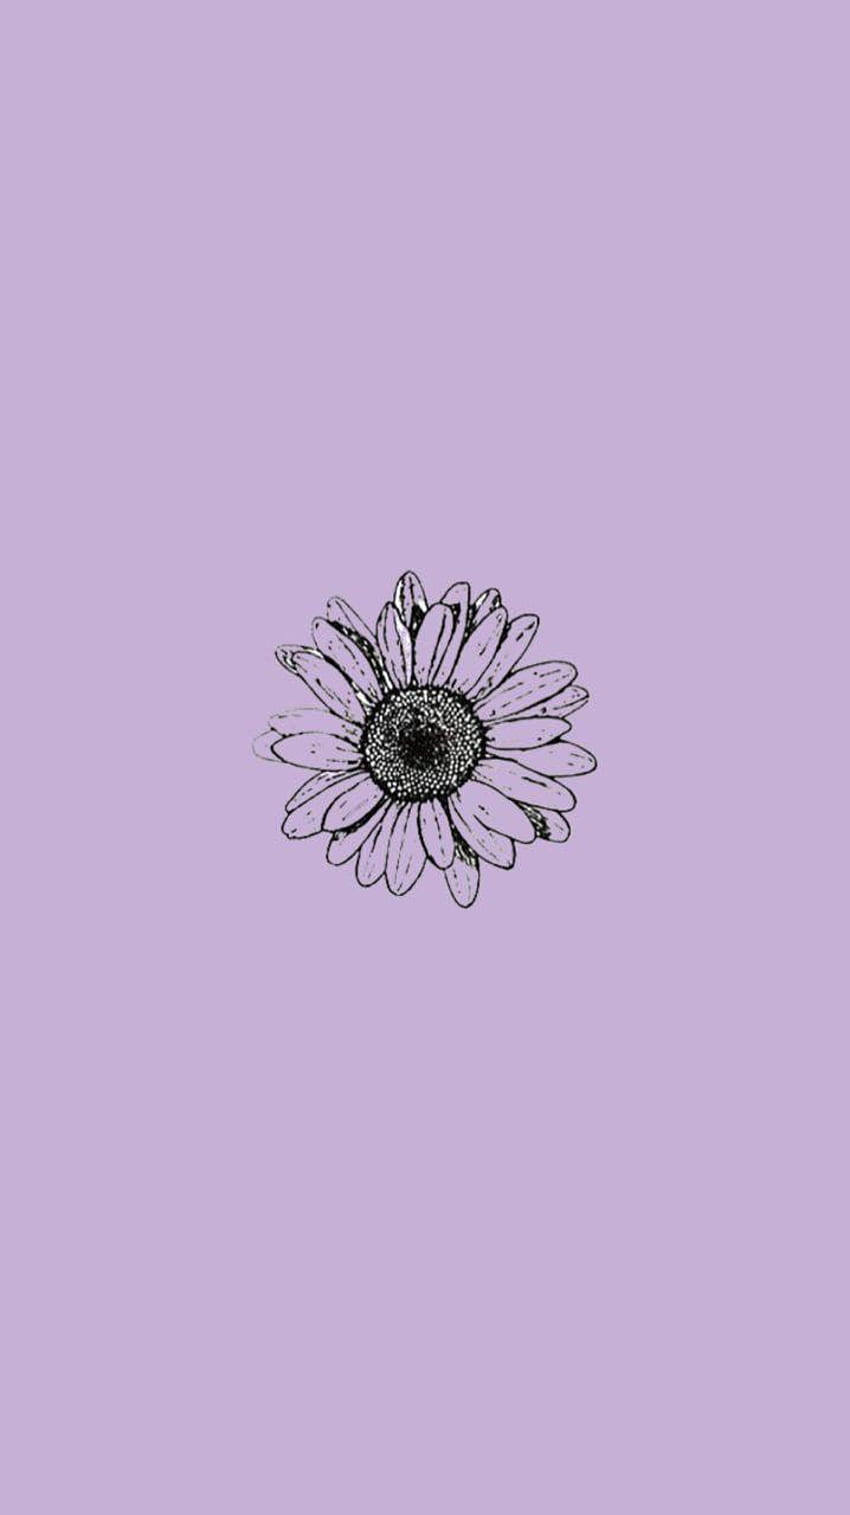 Aesthetic phone backgrounds, purple background, with a black and white flower - Pretty, cute